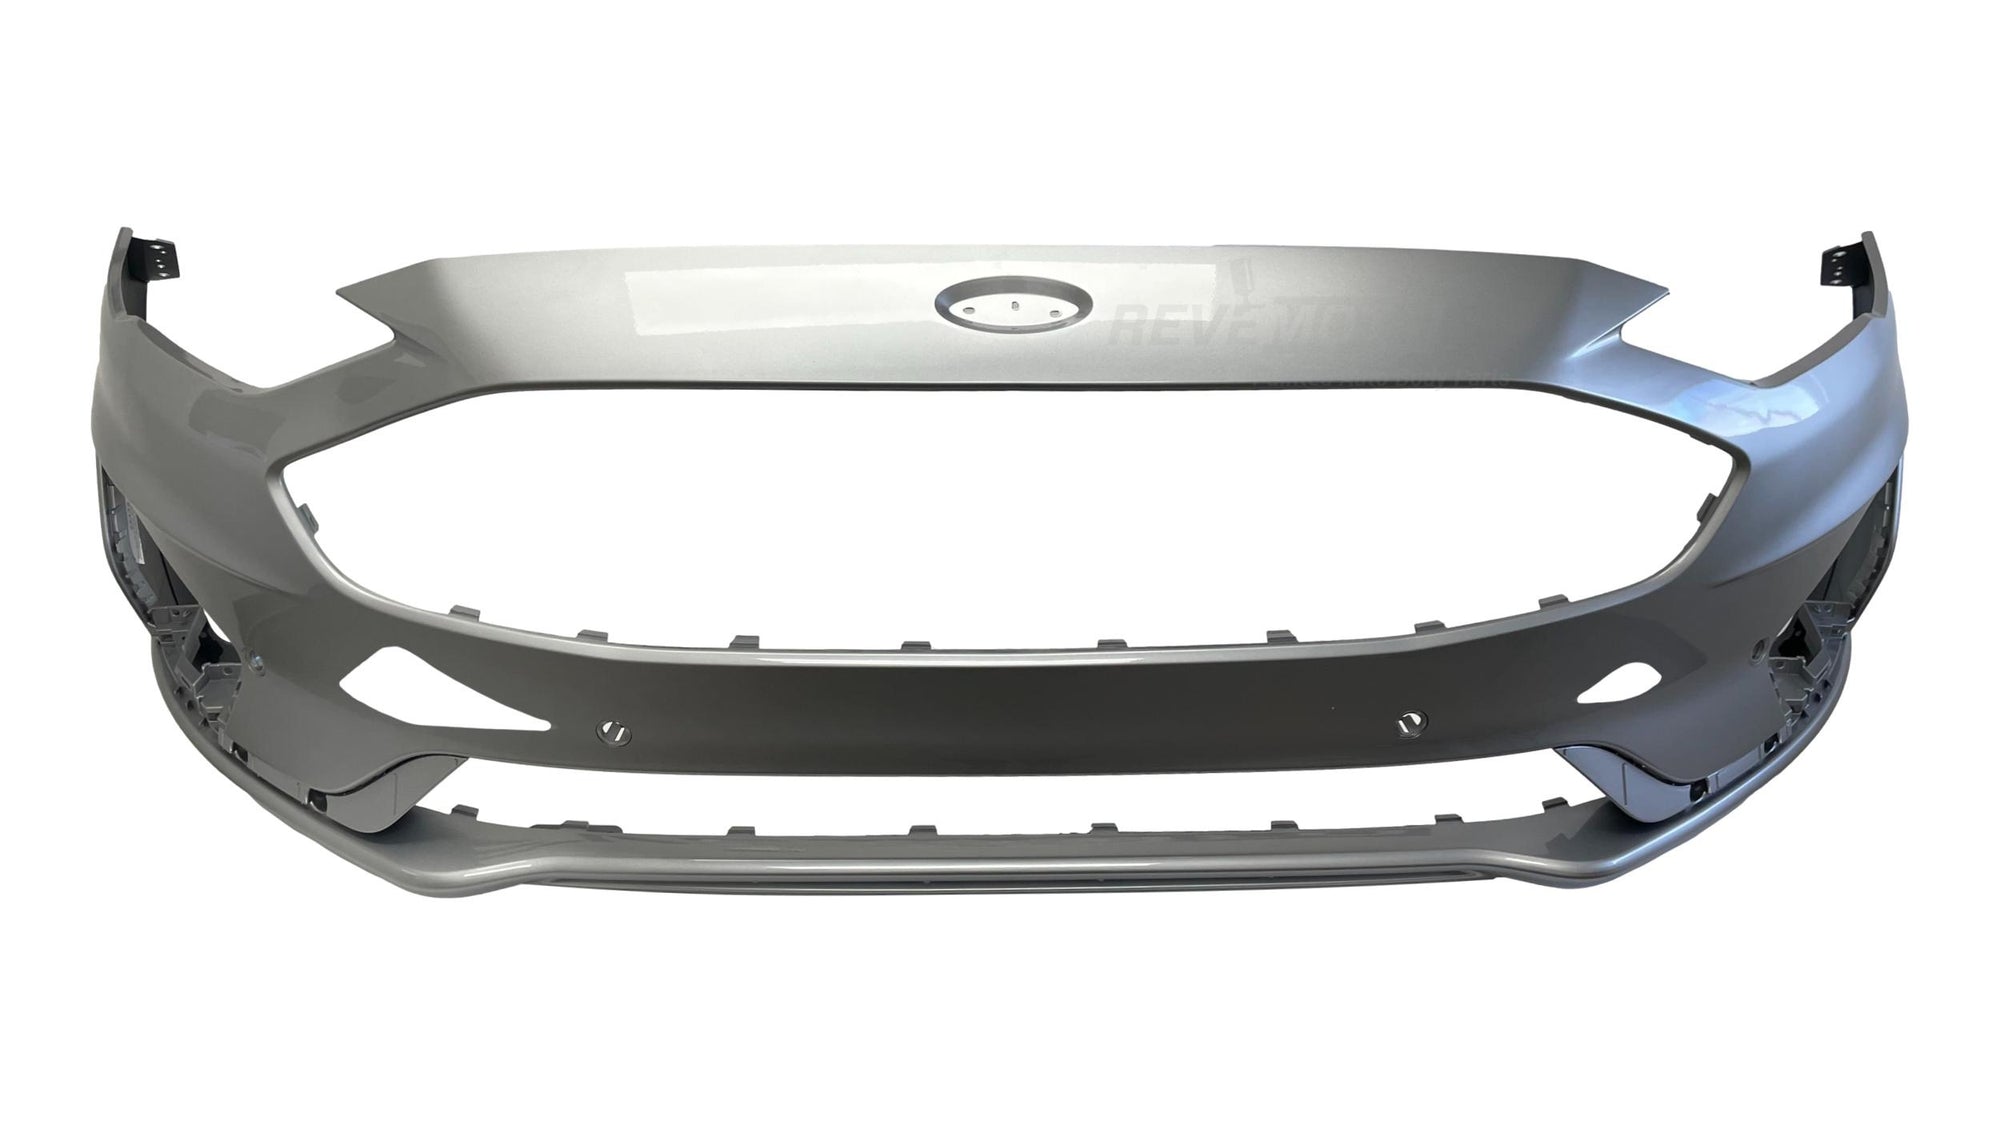 25332 - 2019-2020 Ford Fusion Front Bumper Painted (wo Tow Hook Holes) Iconic Silver Metallic (JS)¬†KS7Z17D957SAPTM FO1000758